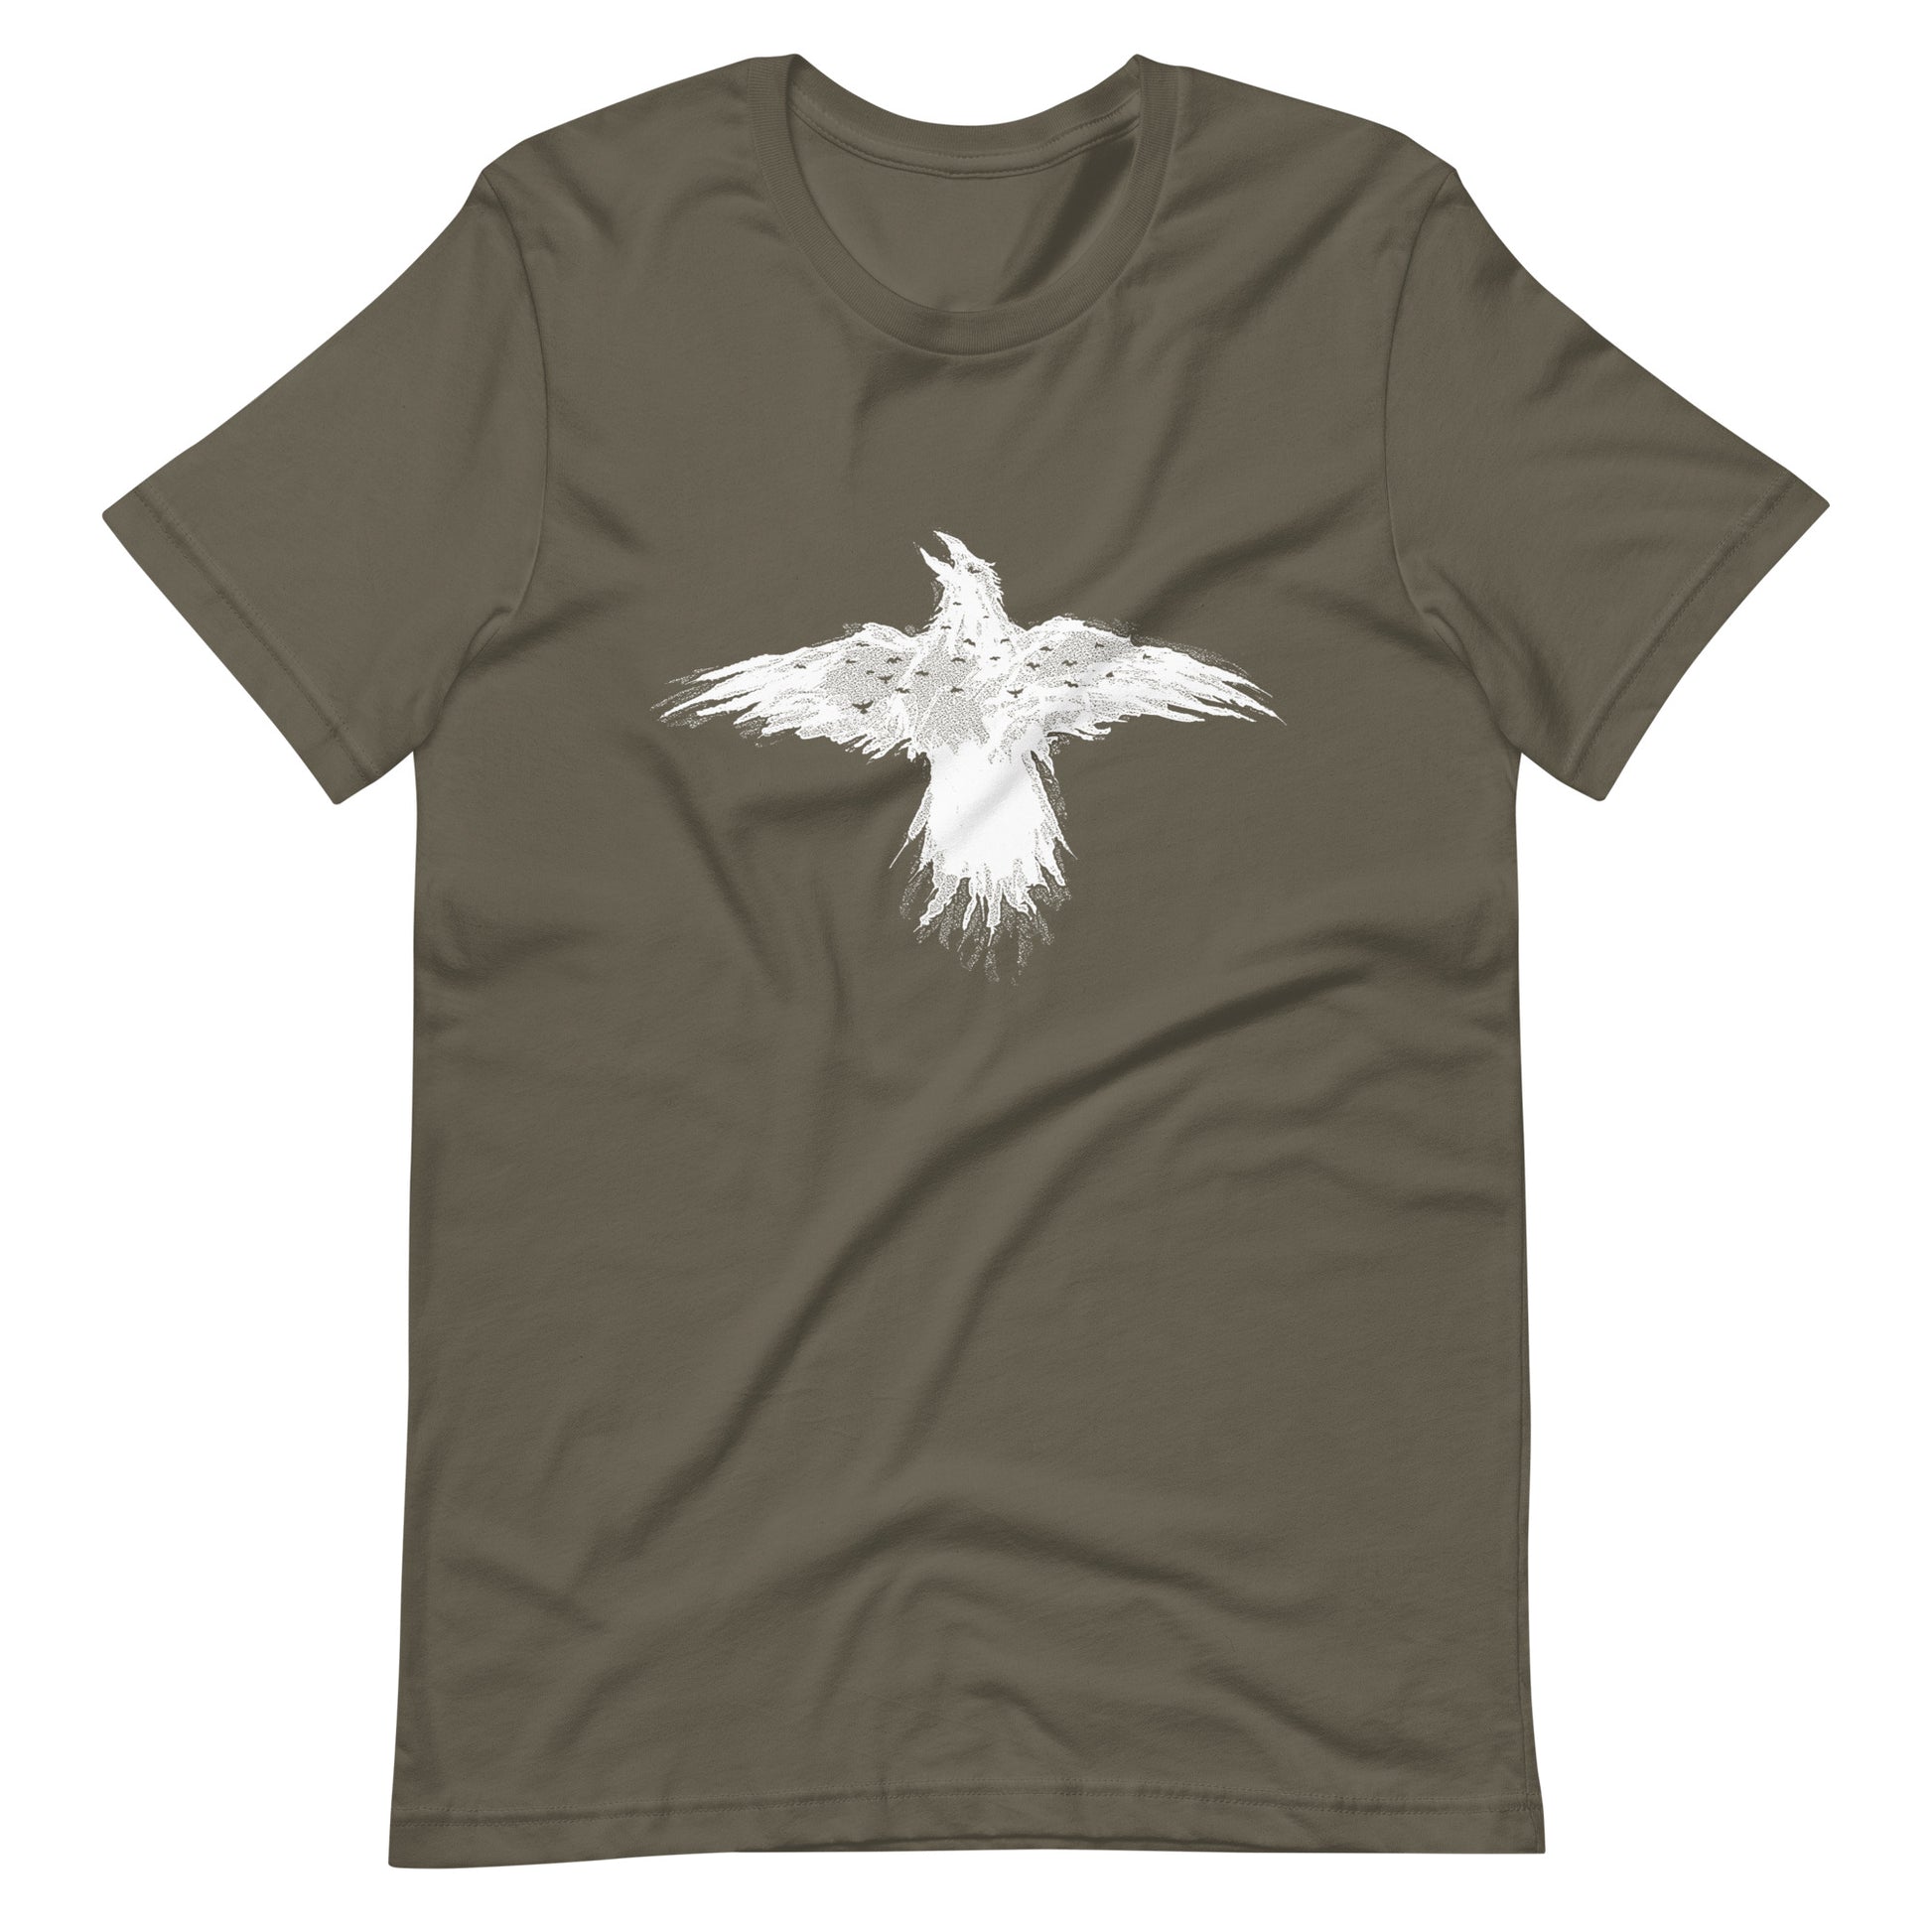 Flying Crow - Men's t-shirt - Army Front